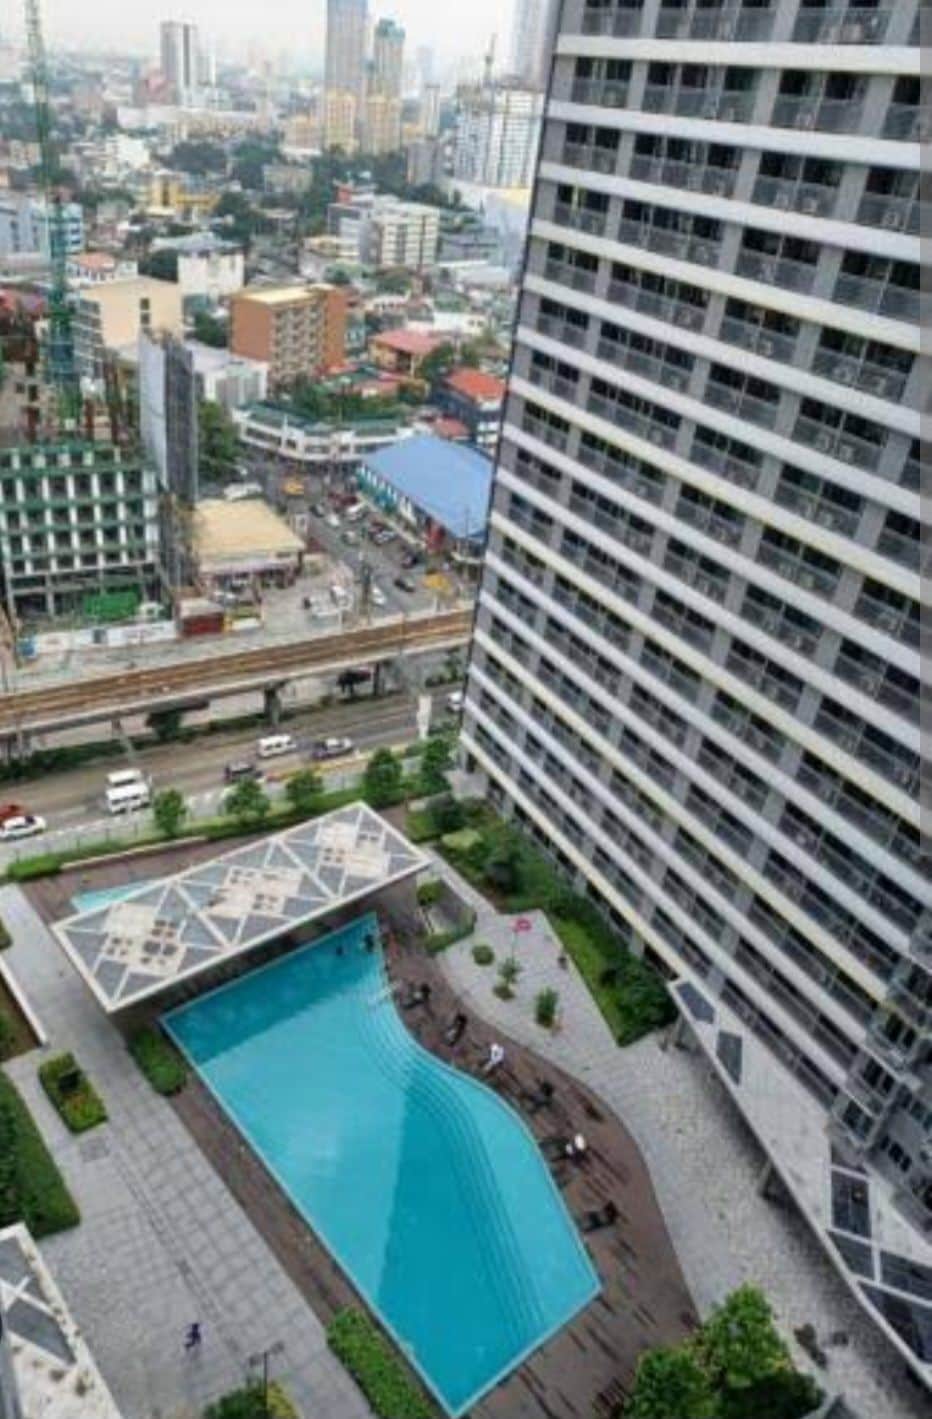 Brian 's Cozy Pad - Fame Residences, Mandaluyong